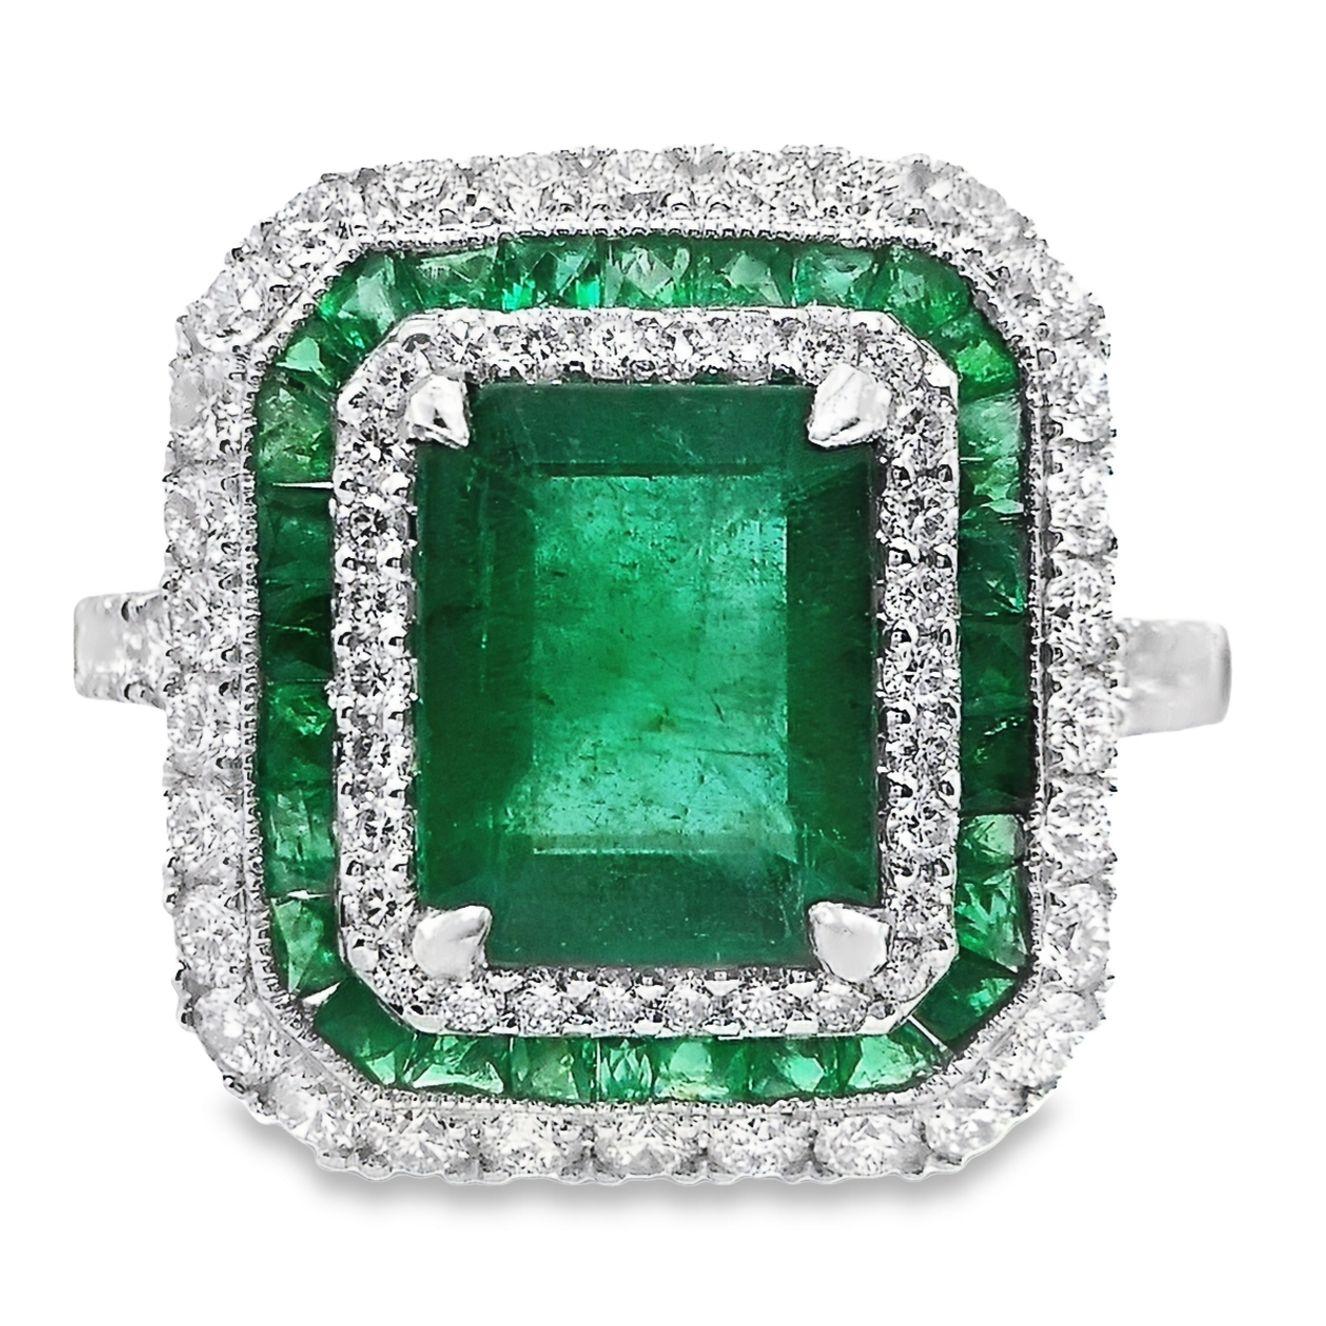 A dazzling emerald ring in 18K white gold setting, from Top Crown Jewelry collection. 
These center pieces of 2.24 carats natural emeralds have a unique intense green color, surrounded by 0.65 carats emeralds and natural sparkling white diamonds.